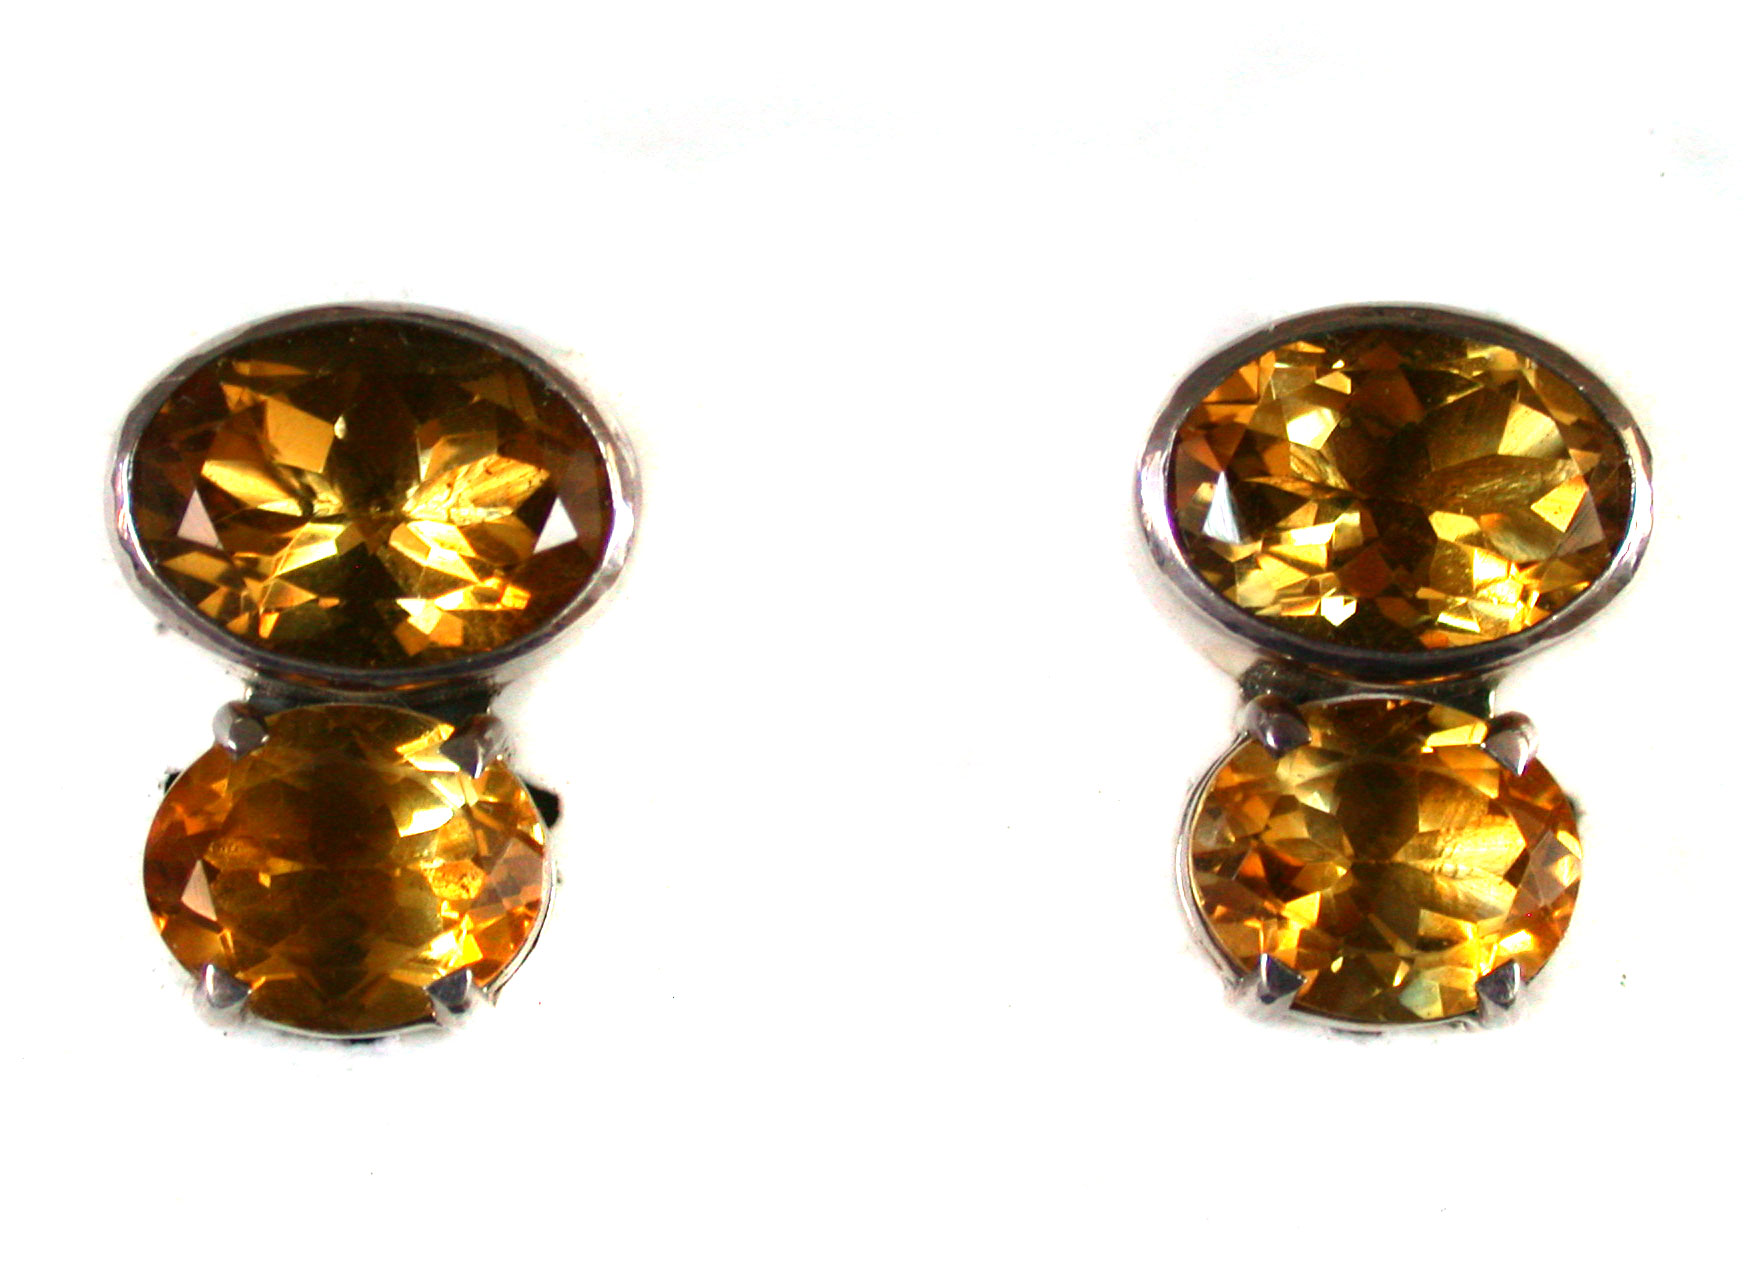 Amy Kahn Russell Online Trunk Show: Faceted Citrine Clip Earrings | Rendezvous Gallery